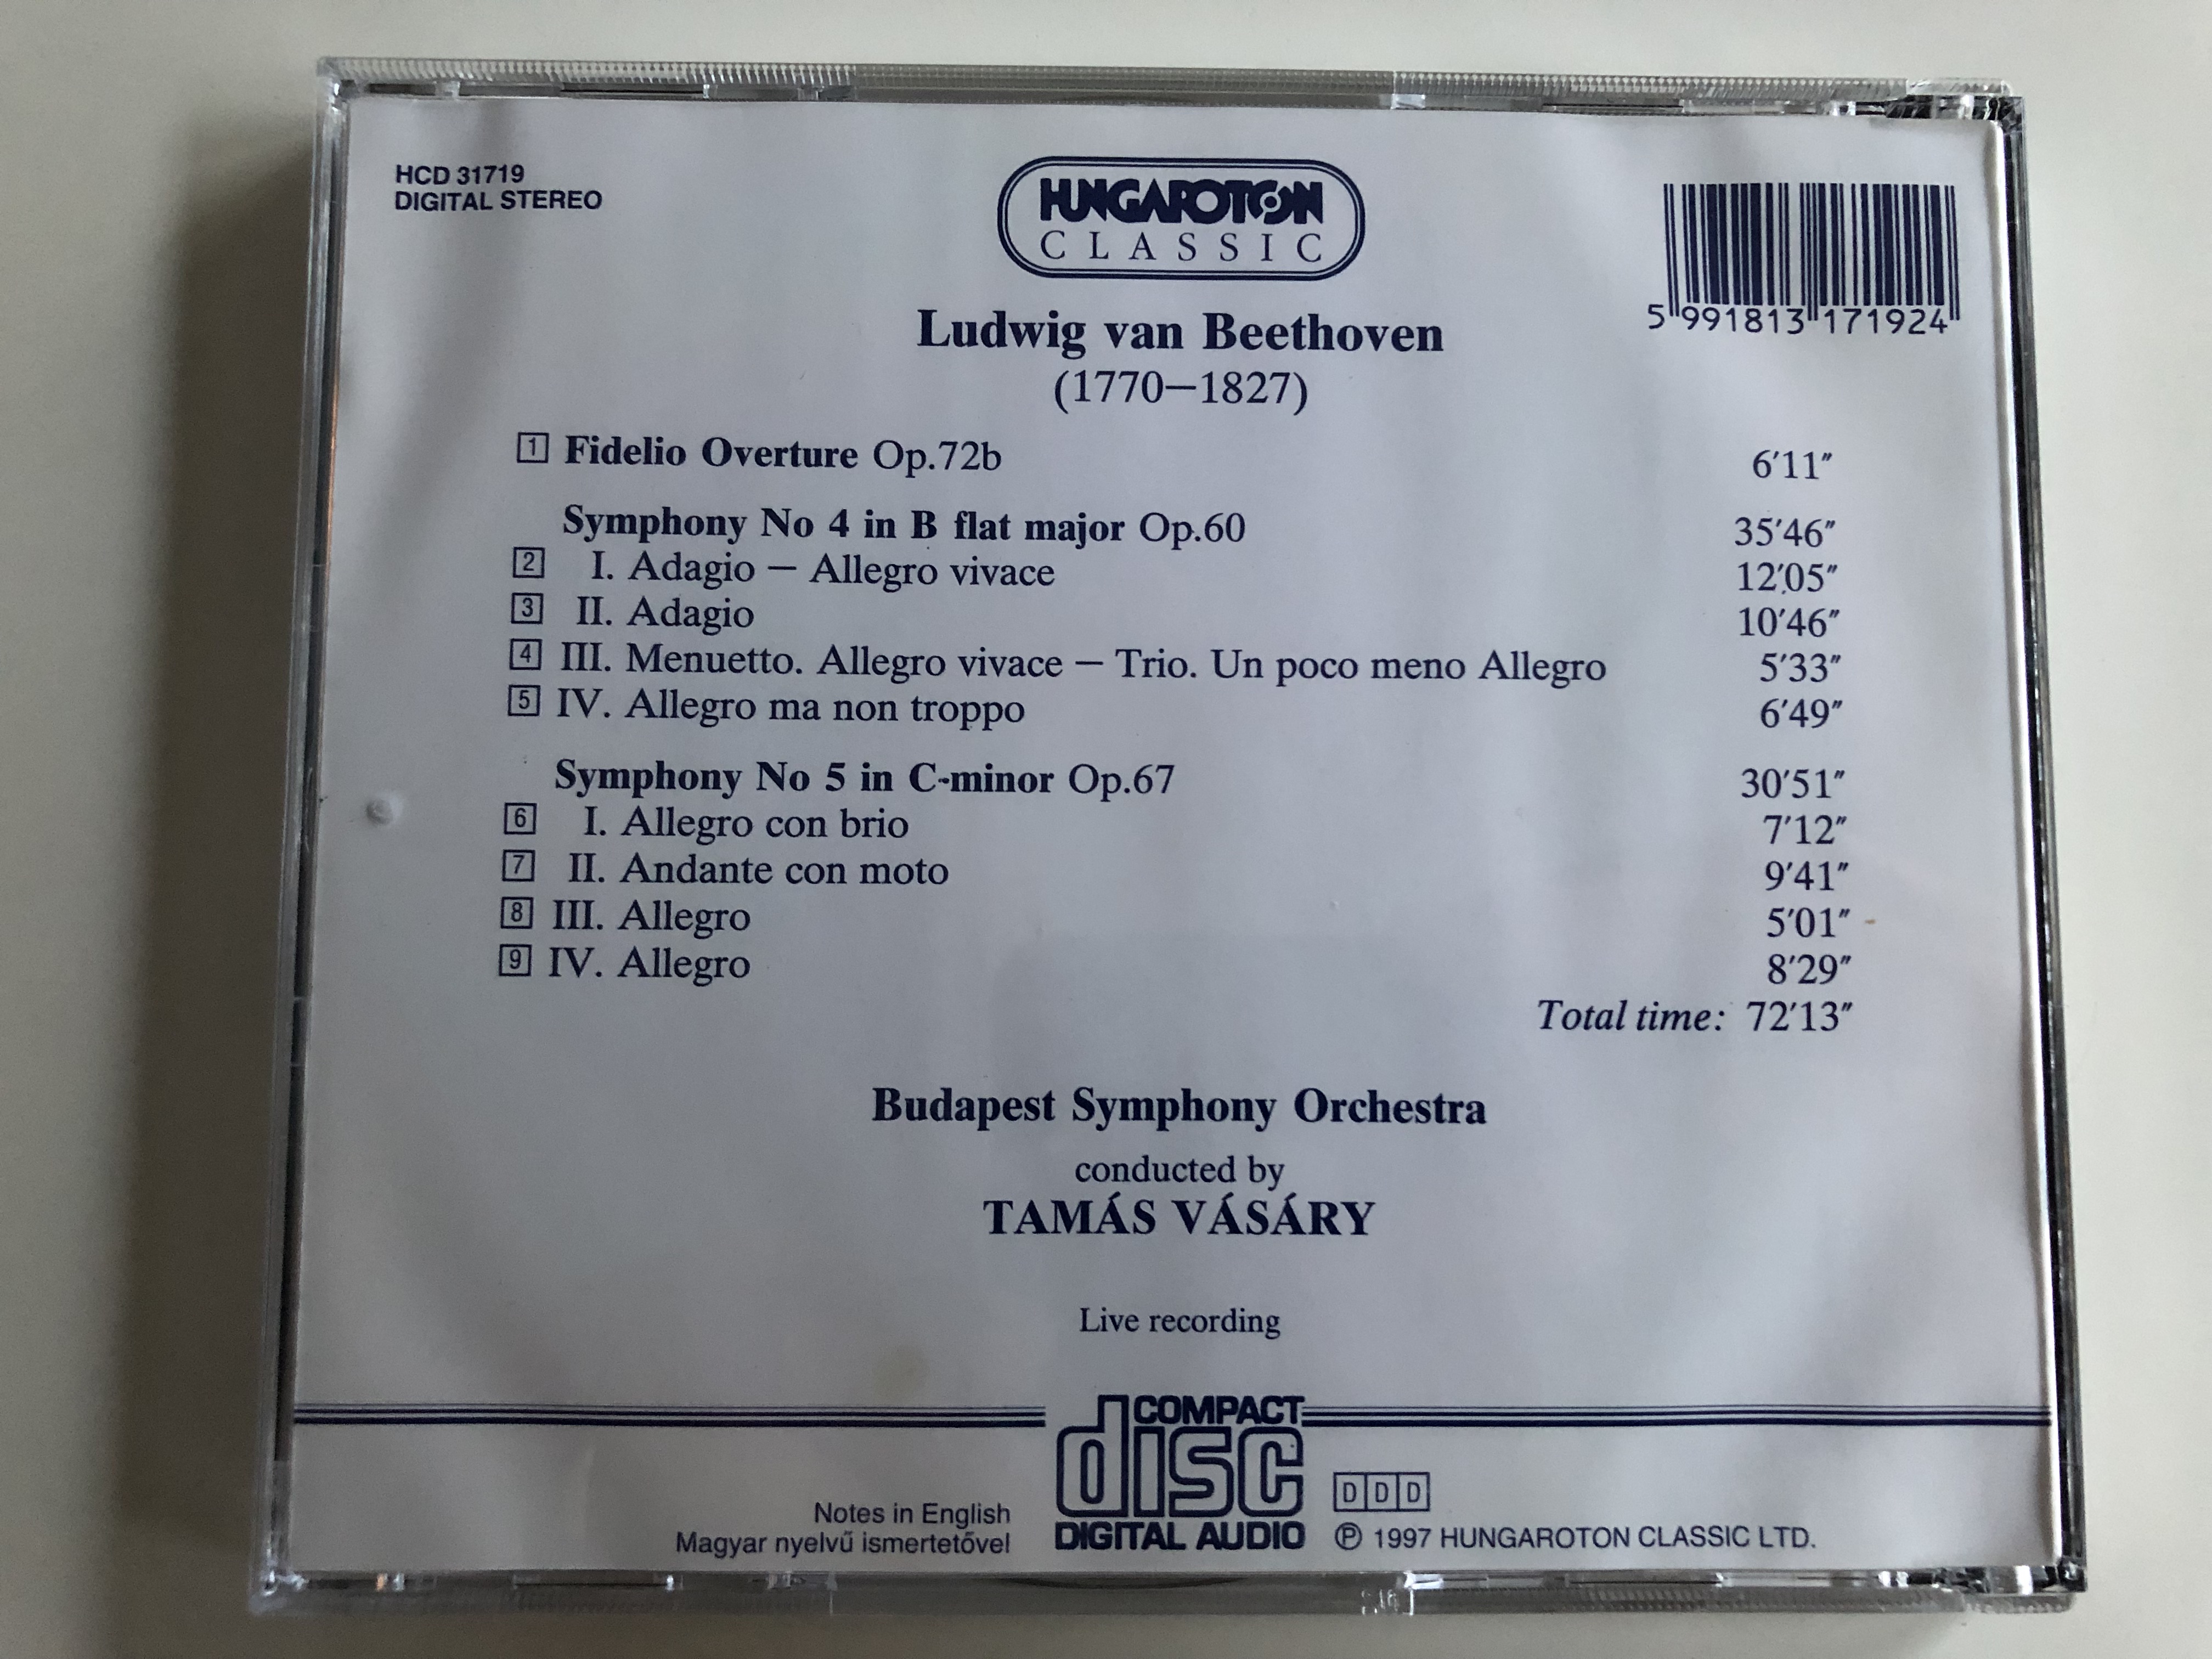 beethoven-symphony-no.-4-no.-5-fidelio-overture-budapest-symphony-orchestra-conducted-by-tam-s-v-s-ry-live-recording-hungaroton-classic-audio-cd-1997-hcd-31719-8-.jpg